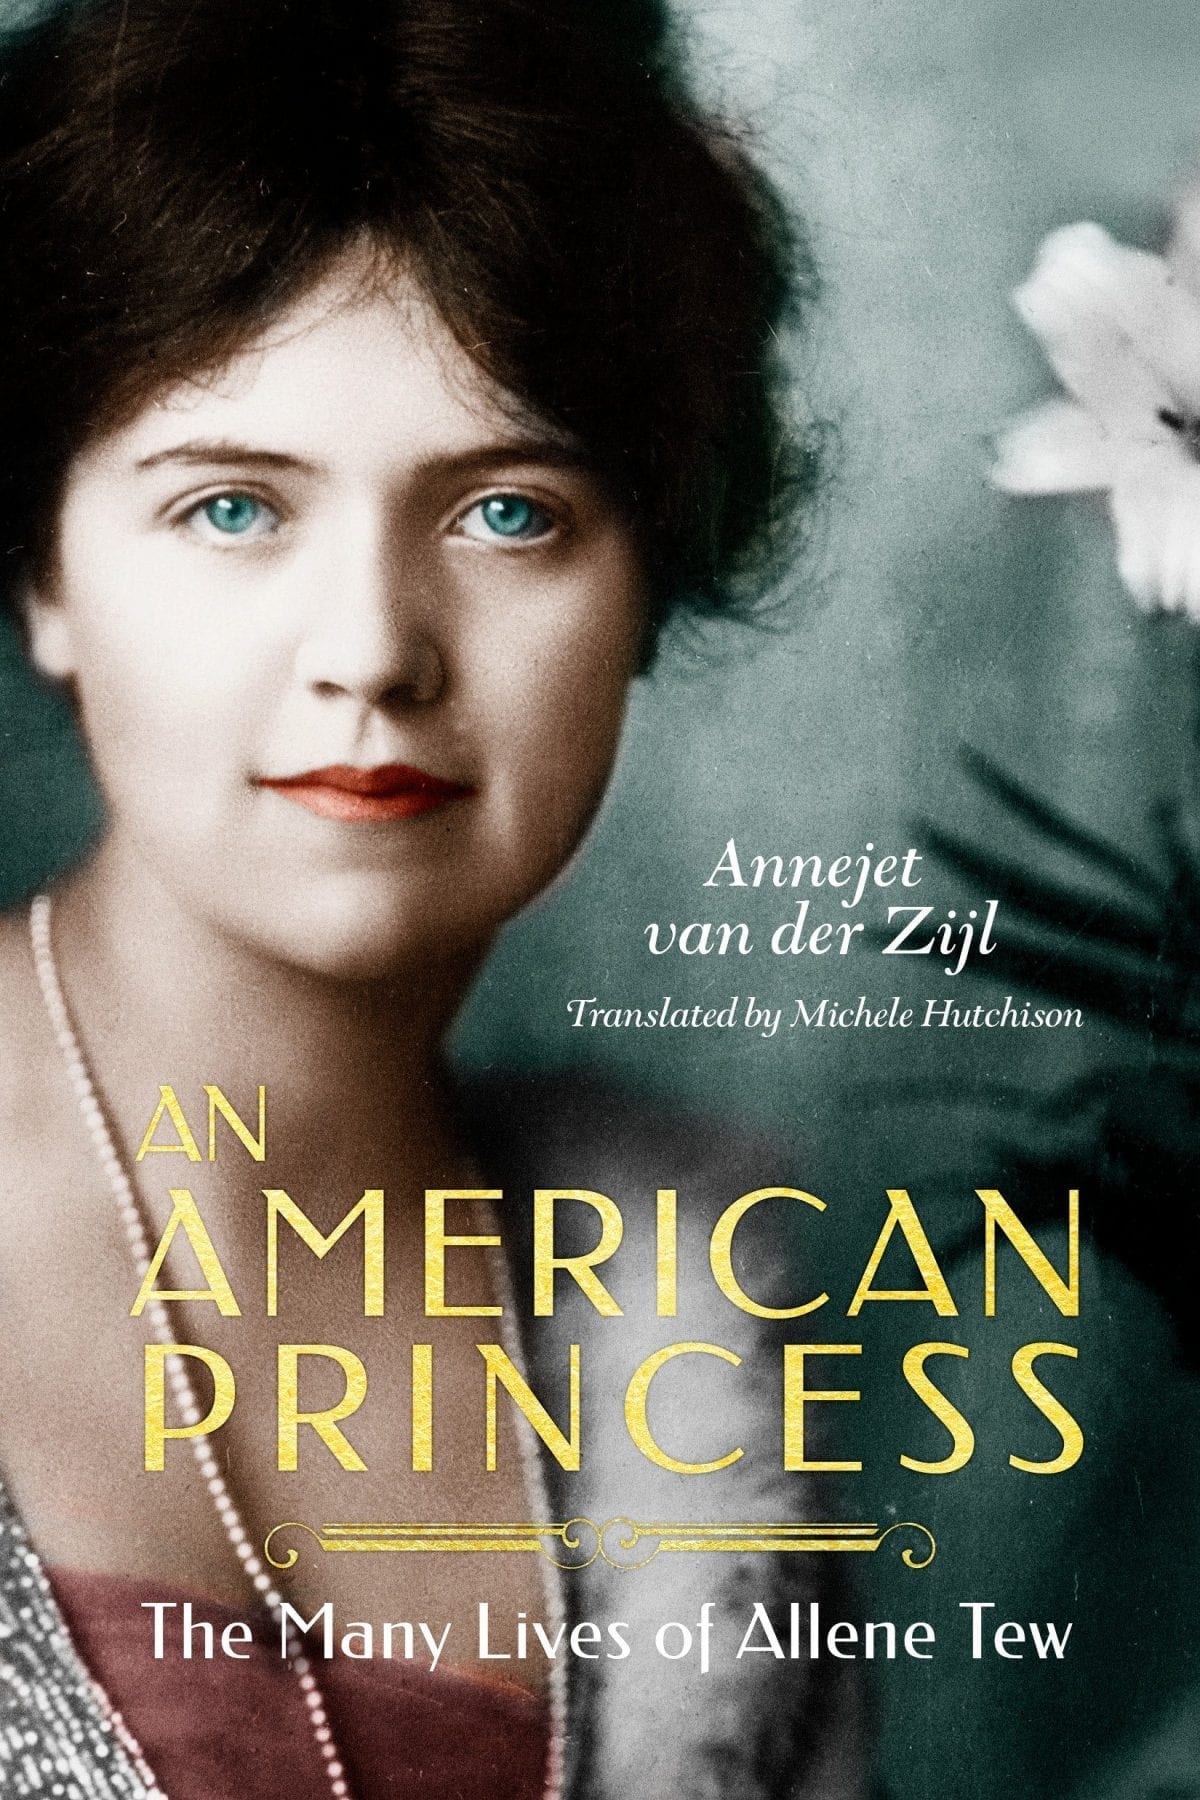 An American Princess- The Many Lives of Allene Tew by Annejet van der Zijl and Michele Hutchison